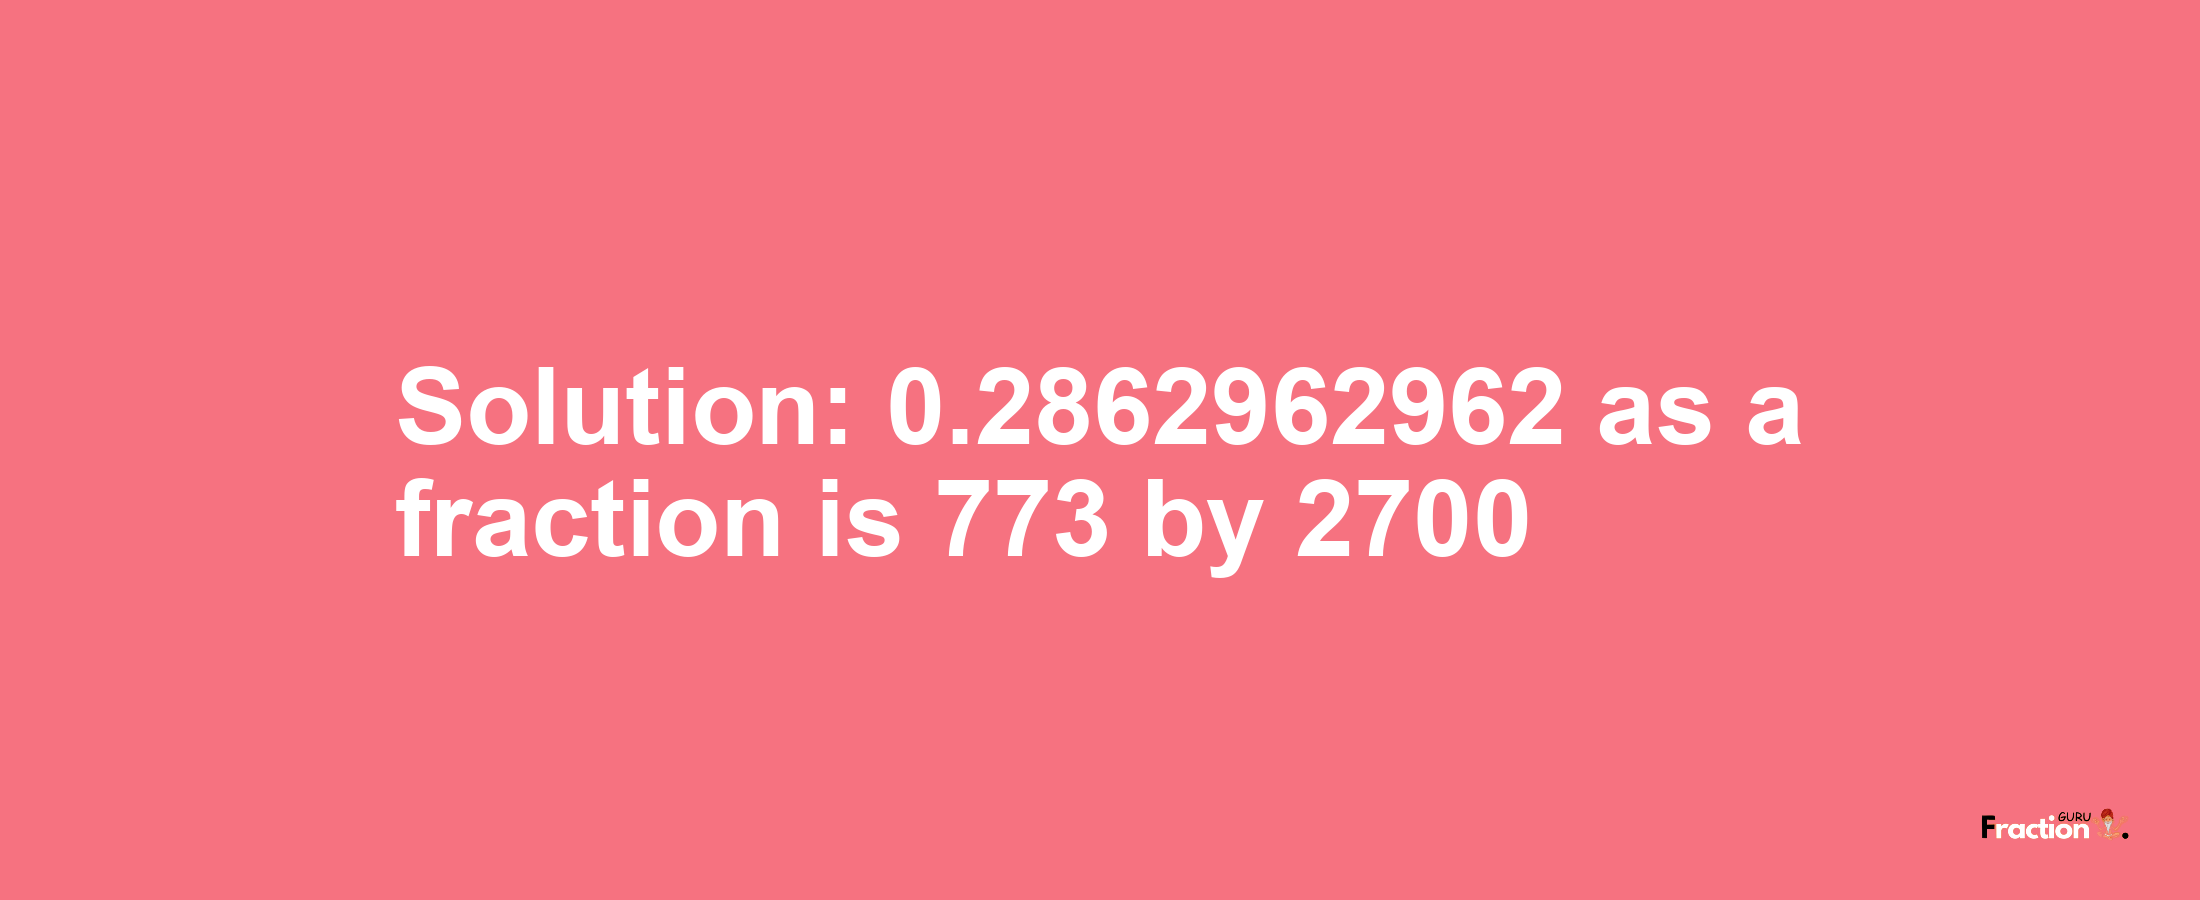 Solution:0.2862962962 as a fraction is 773/2700